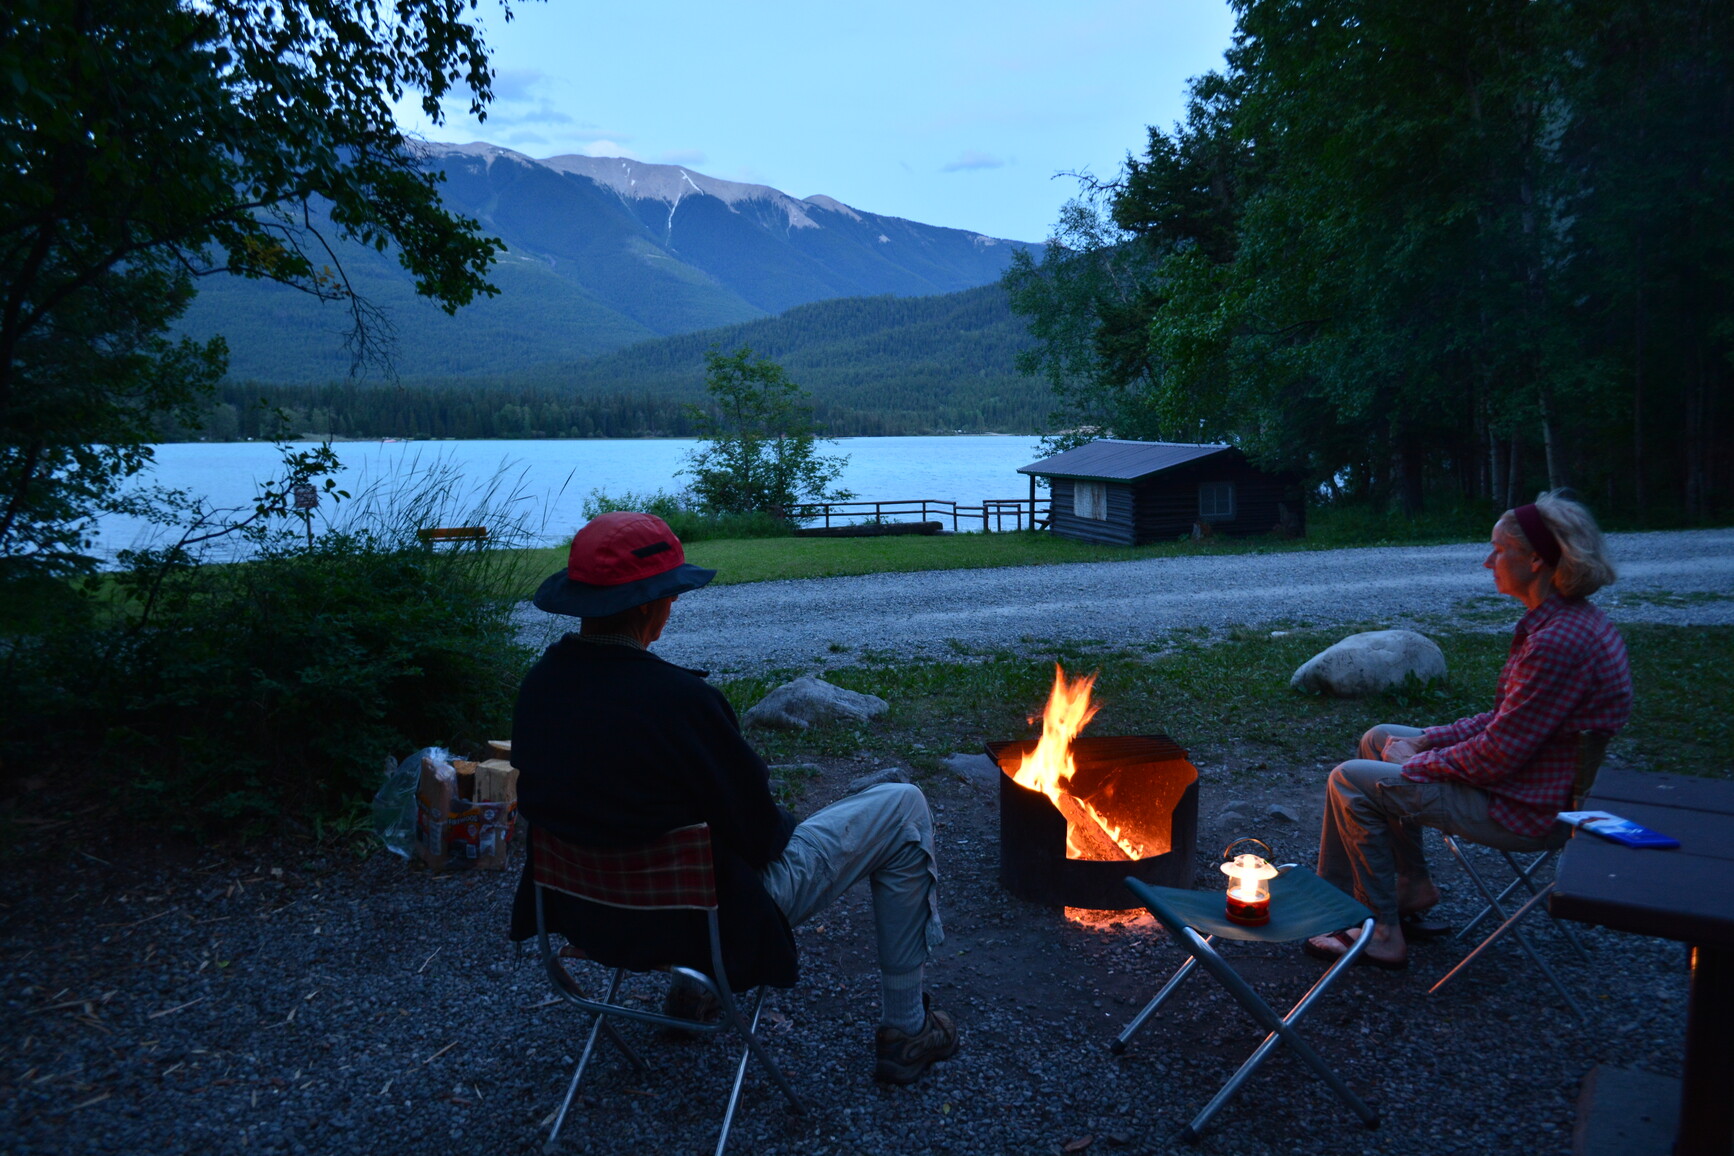 Campers sitting by fire. View of lake and mountains.